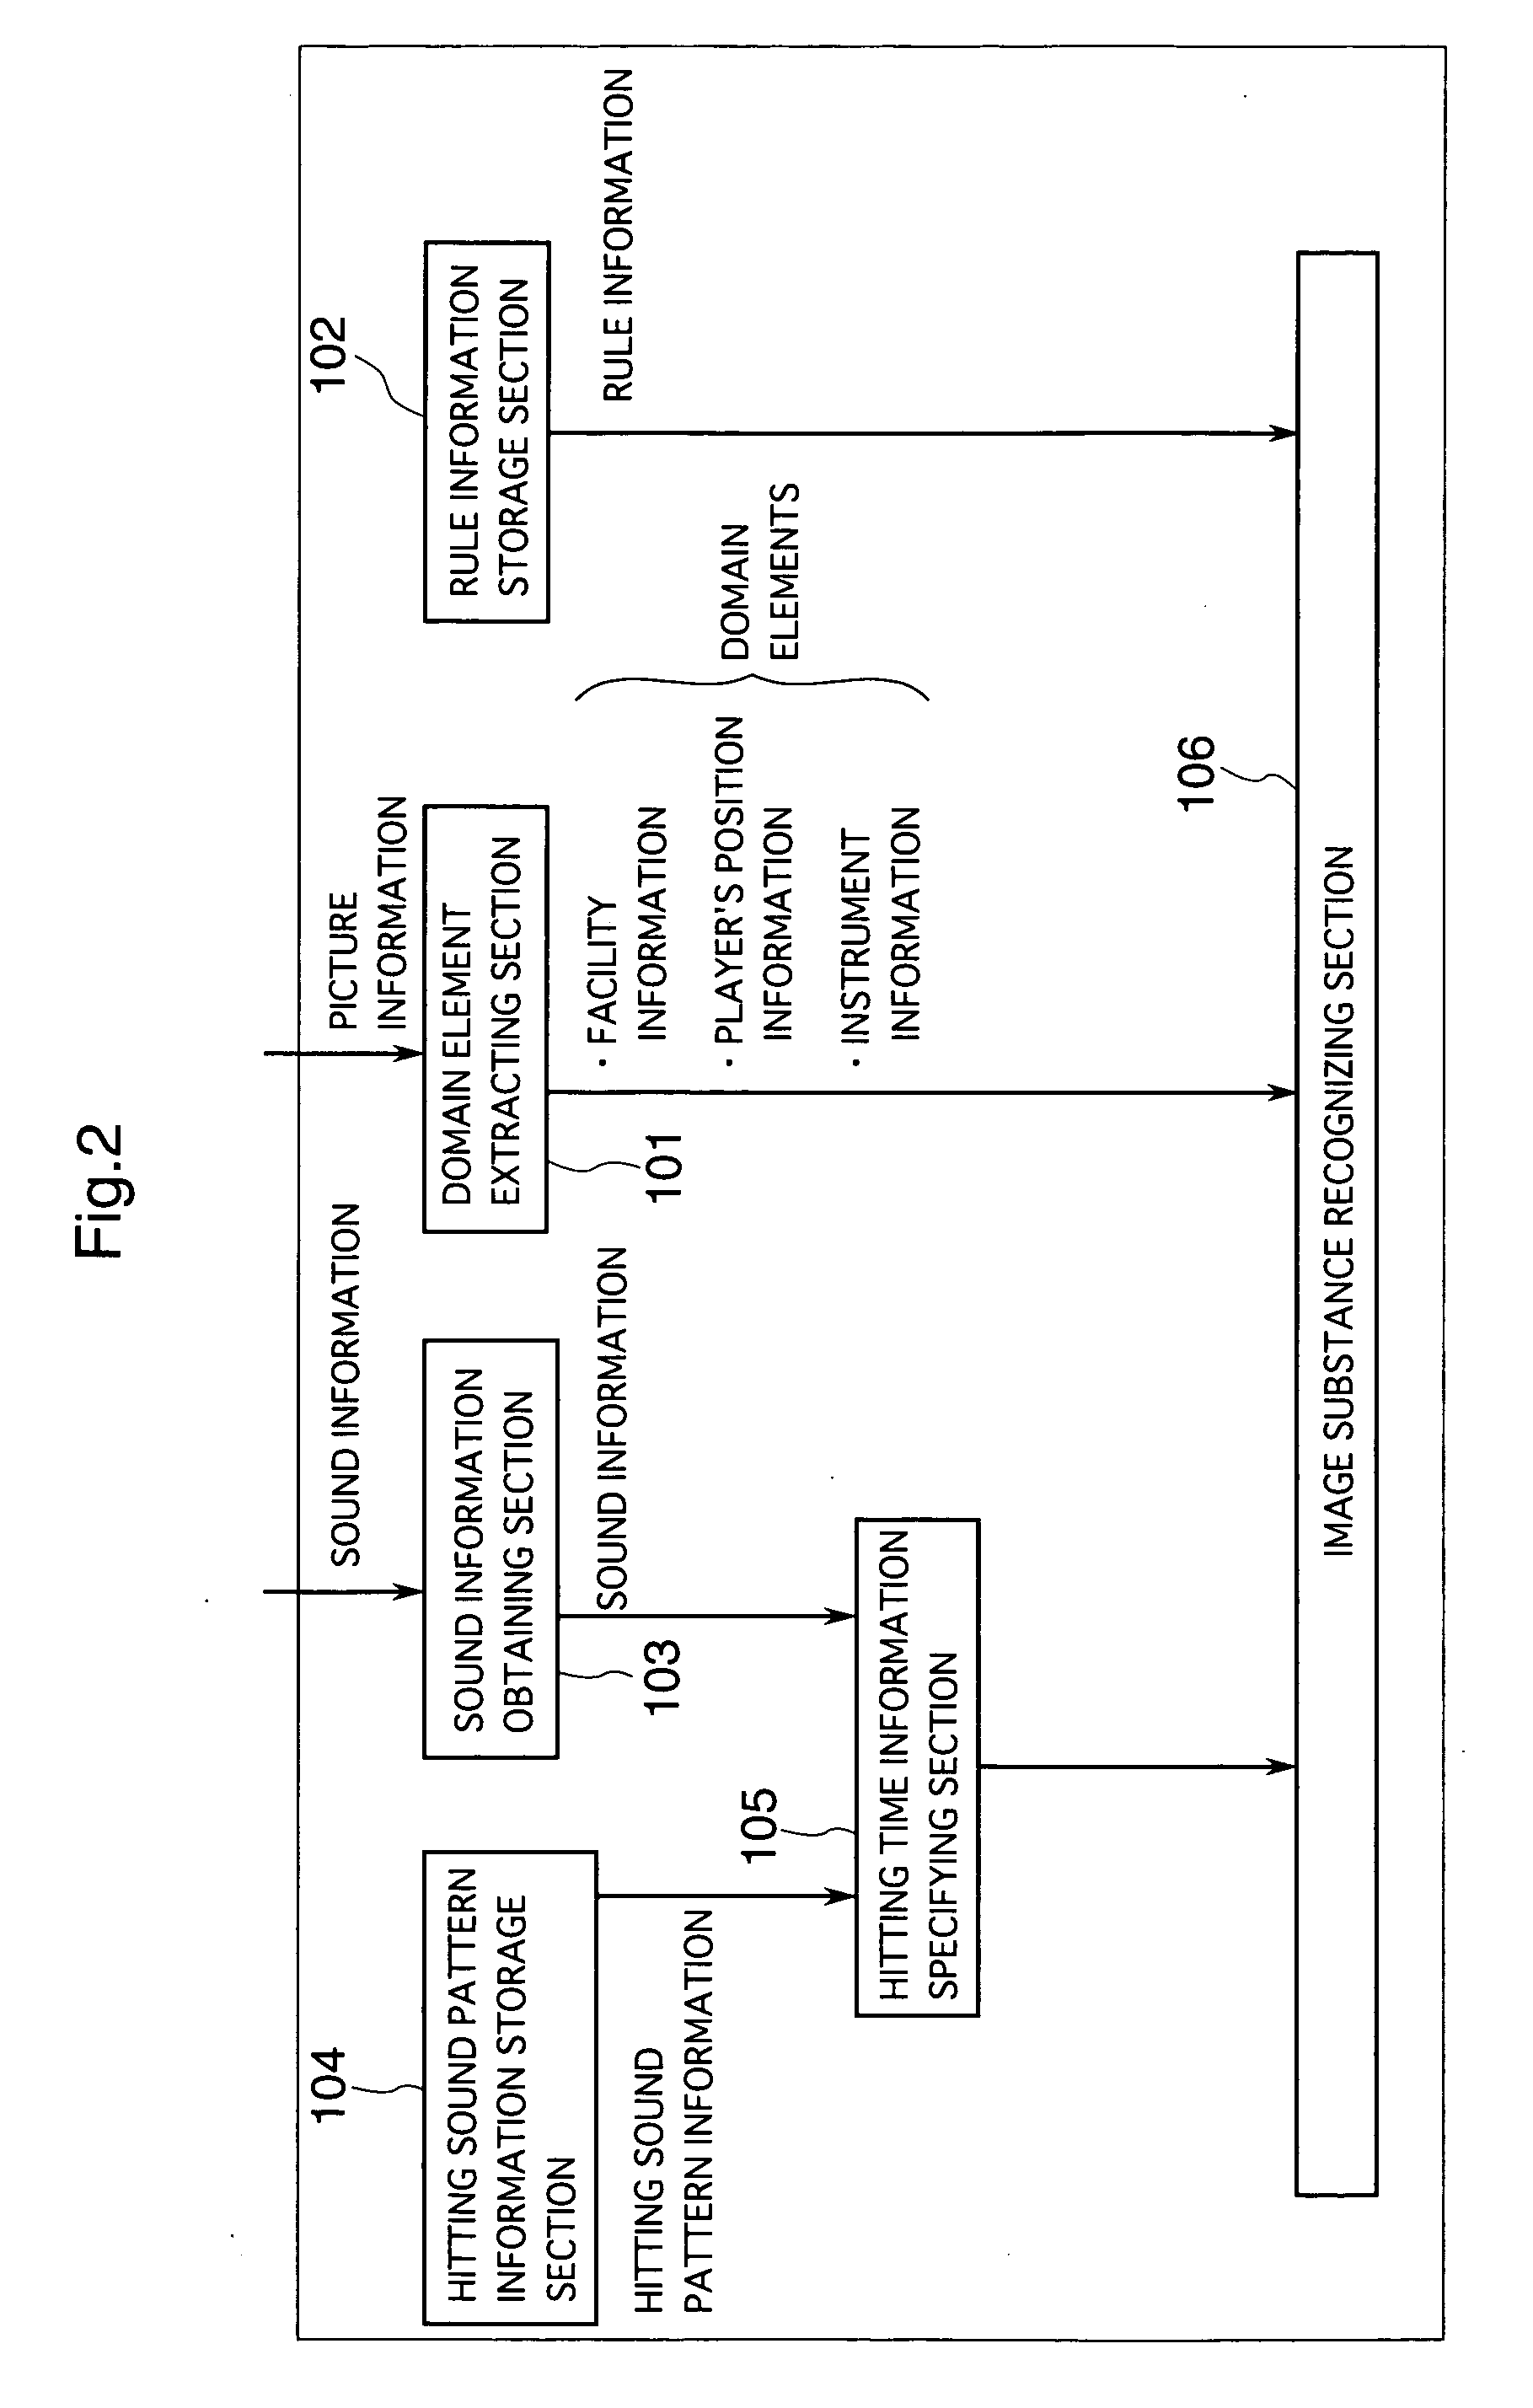 Image recognition apparatus and image recognition program